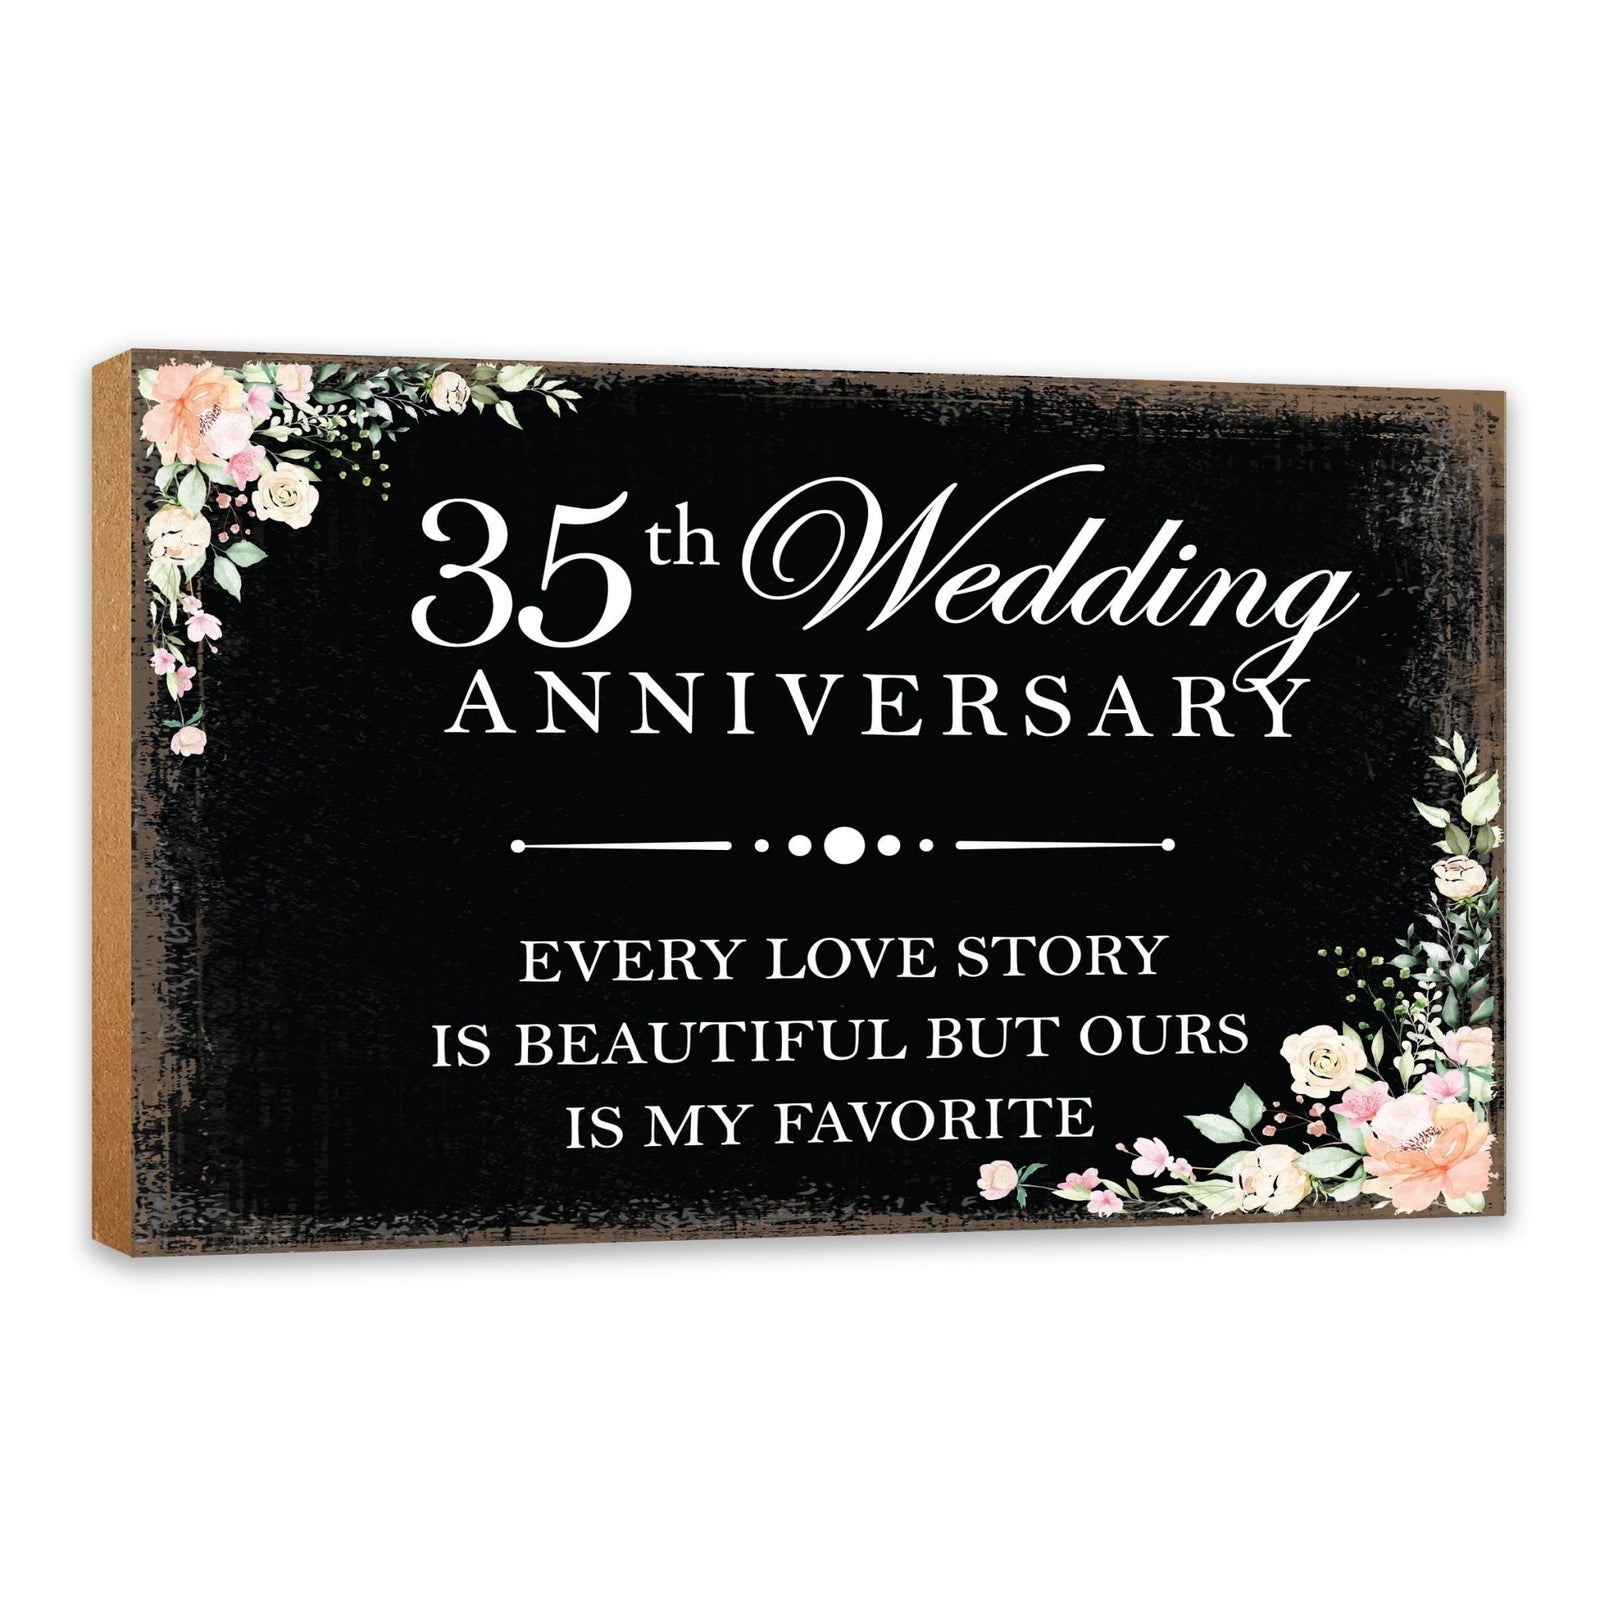 35th Wedding Anniversary Unique Shelf Decor and Tabletop Signs Gift for Couples - Every Love Story - LifeSong Milestones